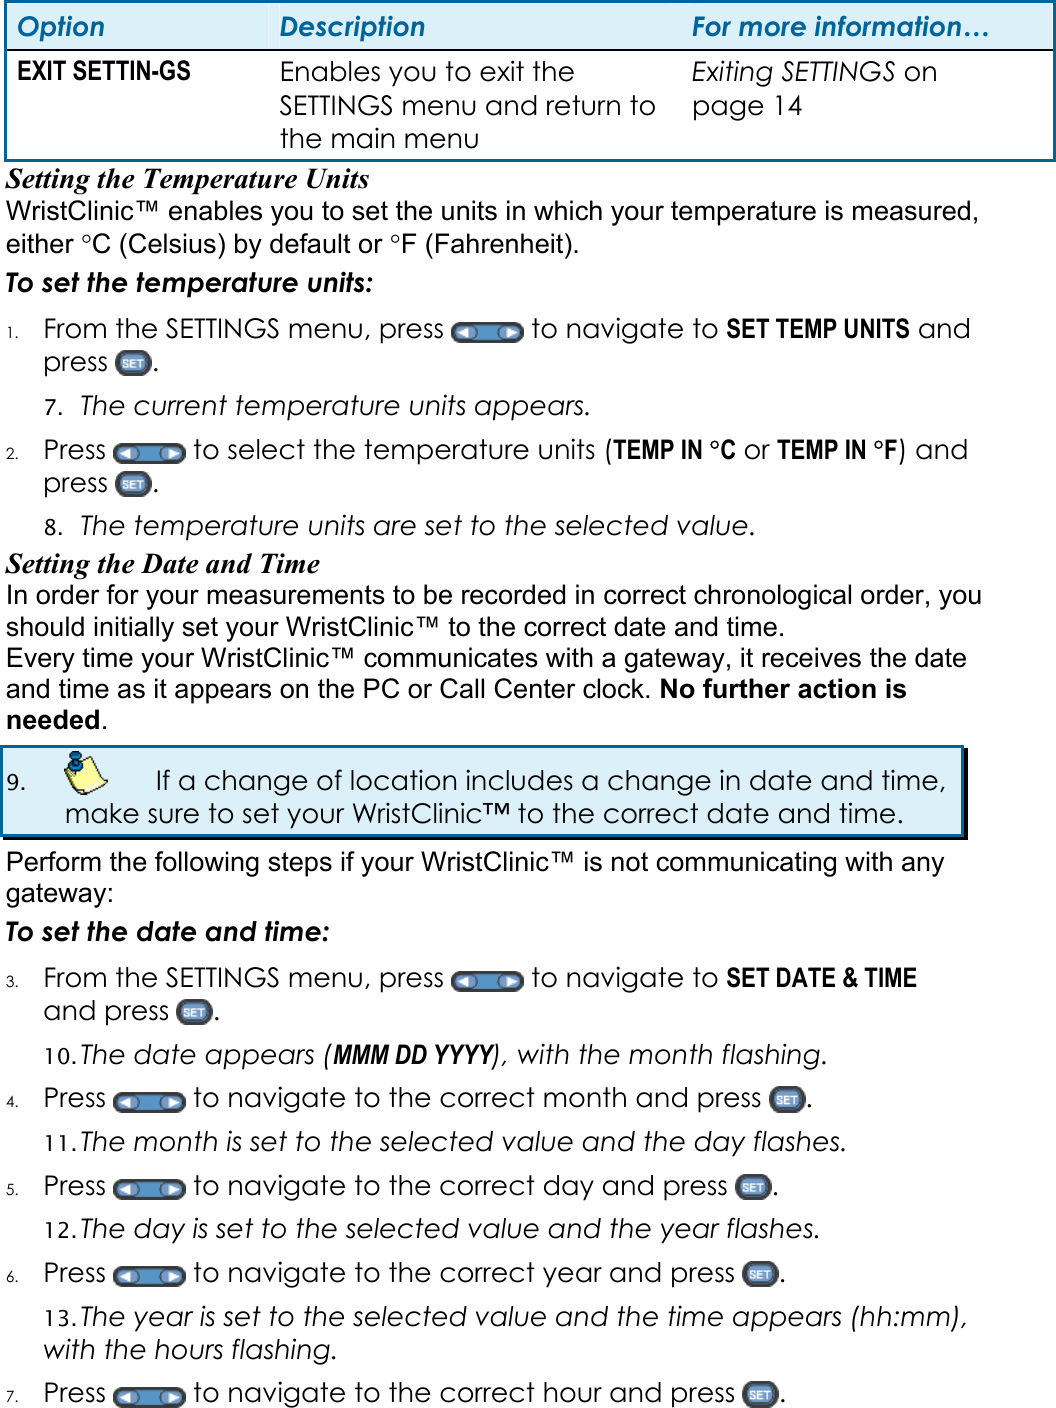 Option  Description  For more information… EXIT SETTIN-GS  Enables you to exit the SETTINGS menu and return to the main menu Exiting SETTINGS on page 14 Setting the Temperature Units   WristClinic™ enables you to set the units in which your temperature is measured, either °C (Celsius) by default or °F (Fahrenheit).  To set the temperature units: 1. From the SETTINGS menu, press   to navigate to SET TEMP UNITS and press  .  7. The current temperature units appears.  2. Press   to select the temperature units (TEMP IN °C or TEMP IN °F) and press  . 8. The temperature units are set to the selected value. Setting the Date and Time In order for your measurements to be recorded in correct chronological order, you should initially set your WristClinic™ to the correct date and time.  Every time your WristClinic™ communicates with a gateway, it receives the date and time as it appears on the PC or Call Center clock. No further action is needed. 9.    If a change of location includes a change in date and time, make sure to set your WristClinic™ to the correct date and time. Perform the following steps if your WristClinic™ is not communicating with any gateway: To set the date and time: 3. From the SETTINGS menu, press   to navigate to SET DATE &amp; TIME and press  . 10. The date appears (MMM DD YYYY), with the month flashing.  4. Press   to navigate to the correct month and press  . 11. The month is set to the selected value and the day flashes. 5. Press   to navigate to the correct day and press  . 12. The day is set to the selected value and the year flashes. 6. Press   to navigate to the correct year and press  . 13. The year is set to the selected value and the time appears (hh:mm), with the hours flashing. 7. Press   to navigate to the correct hour and press  . 